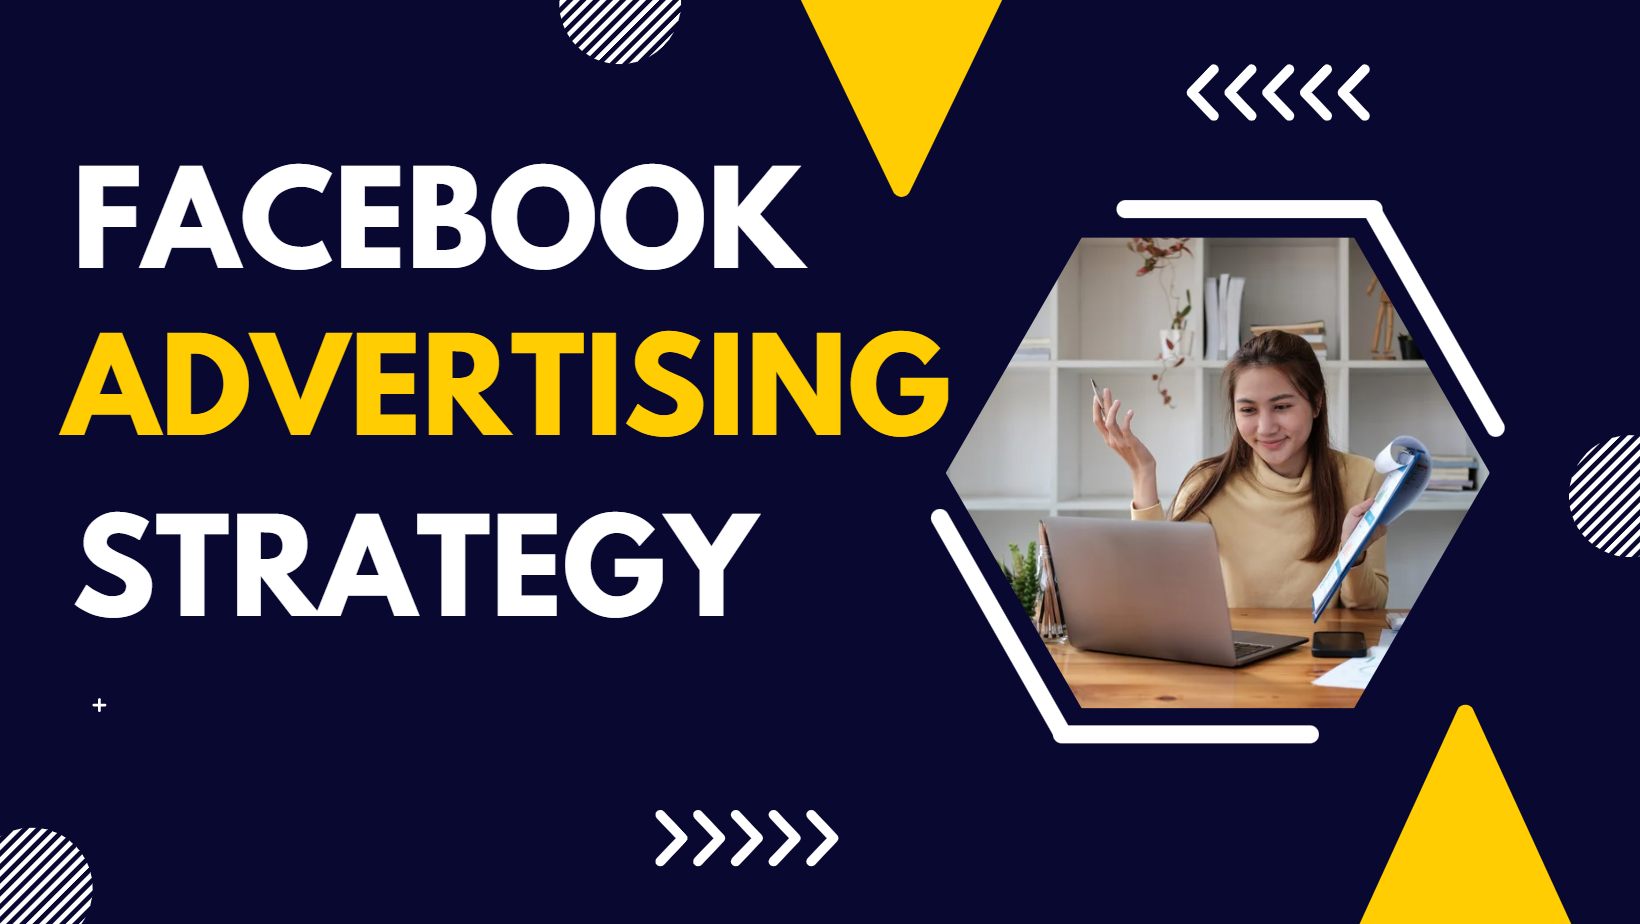 Facebook advertising strategy